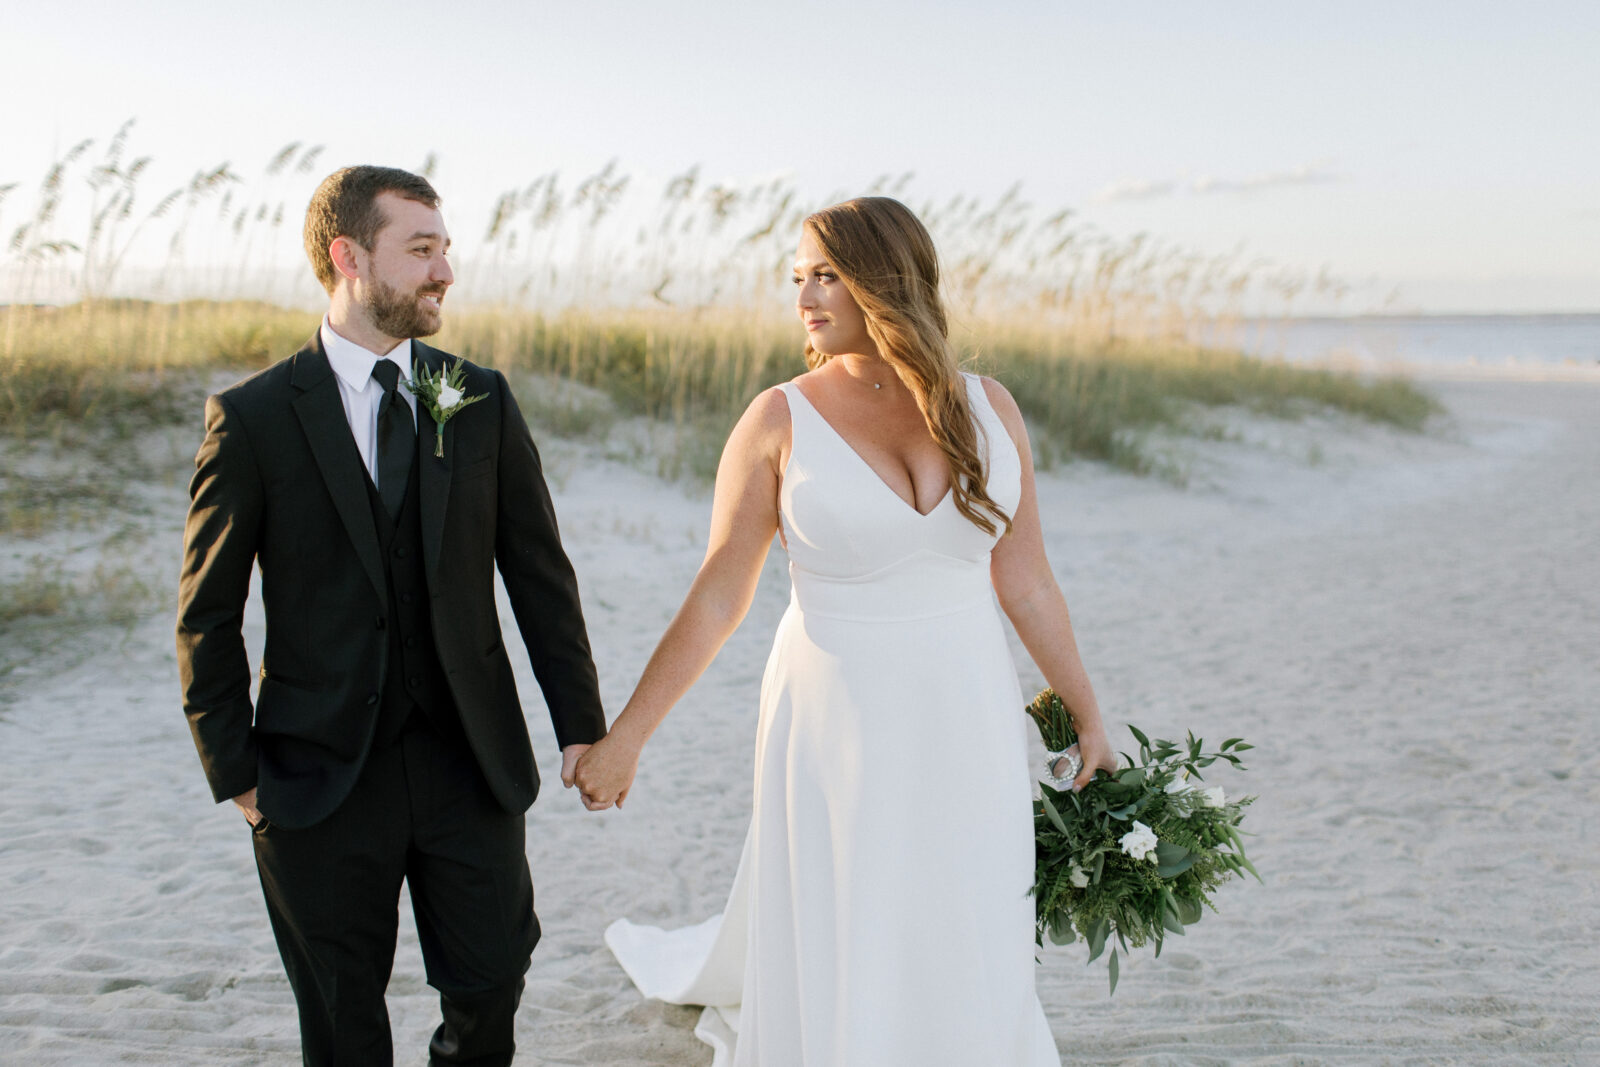 bride and groom walk on beach smiling at each other with dunes in background